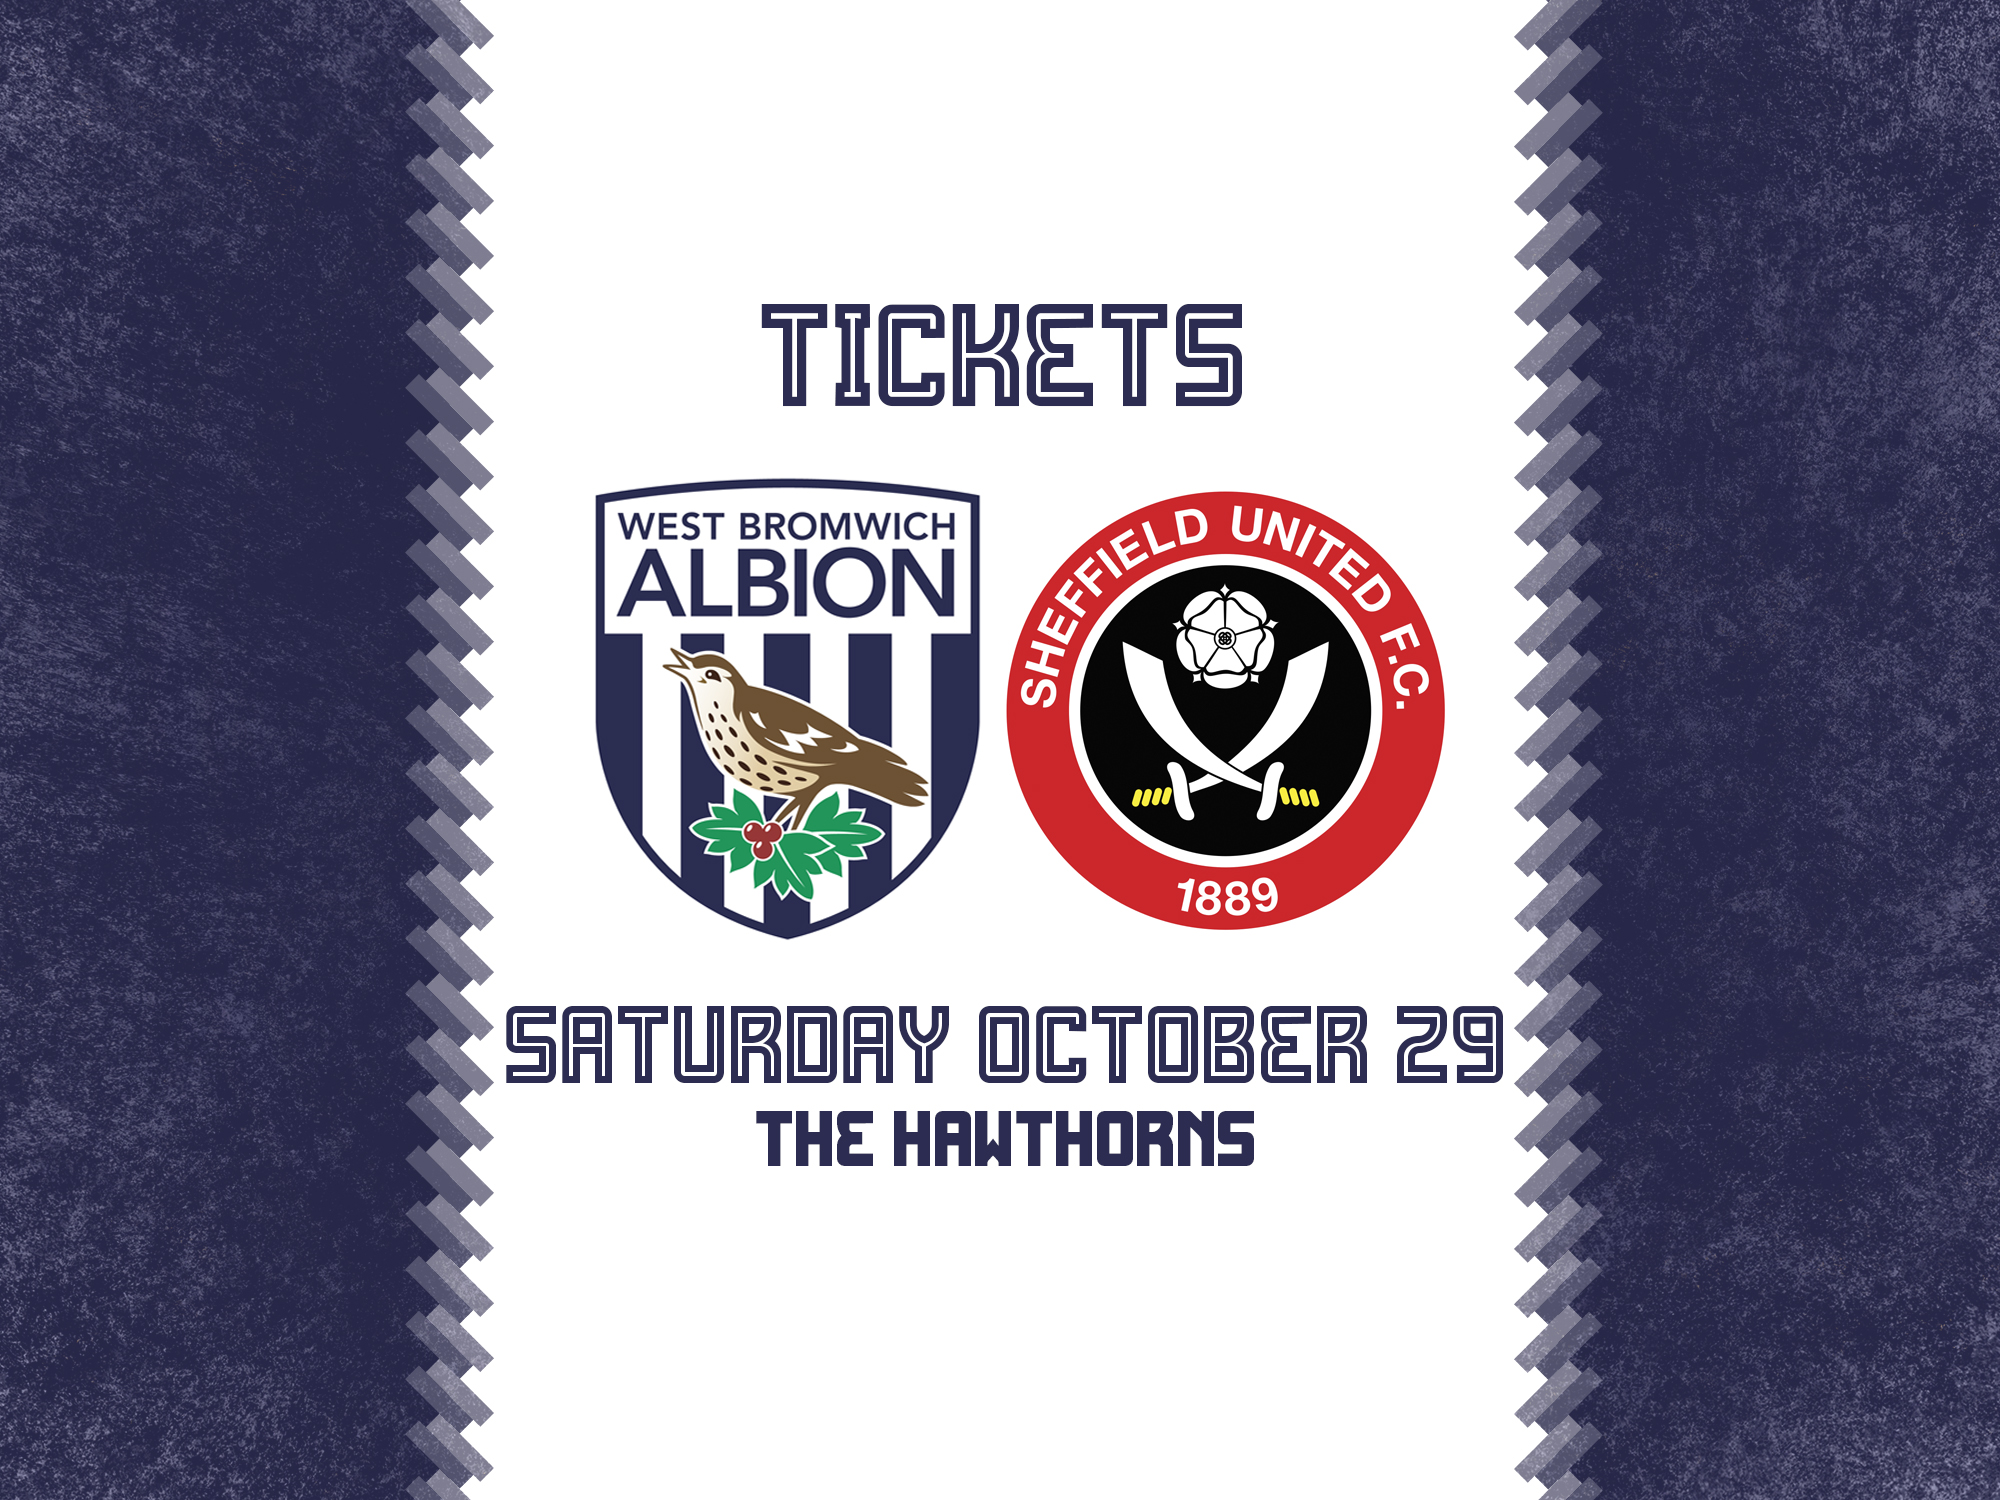 Tickets are now on general sale for Albion's game against Sheffield United